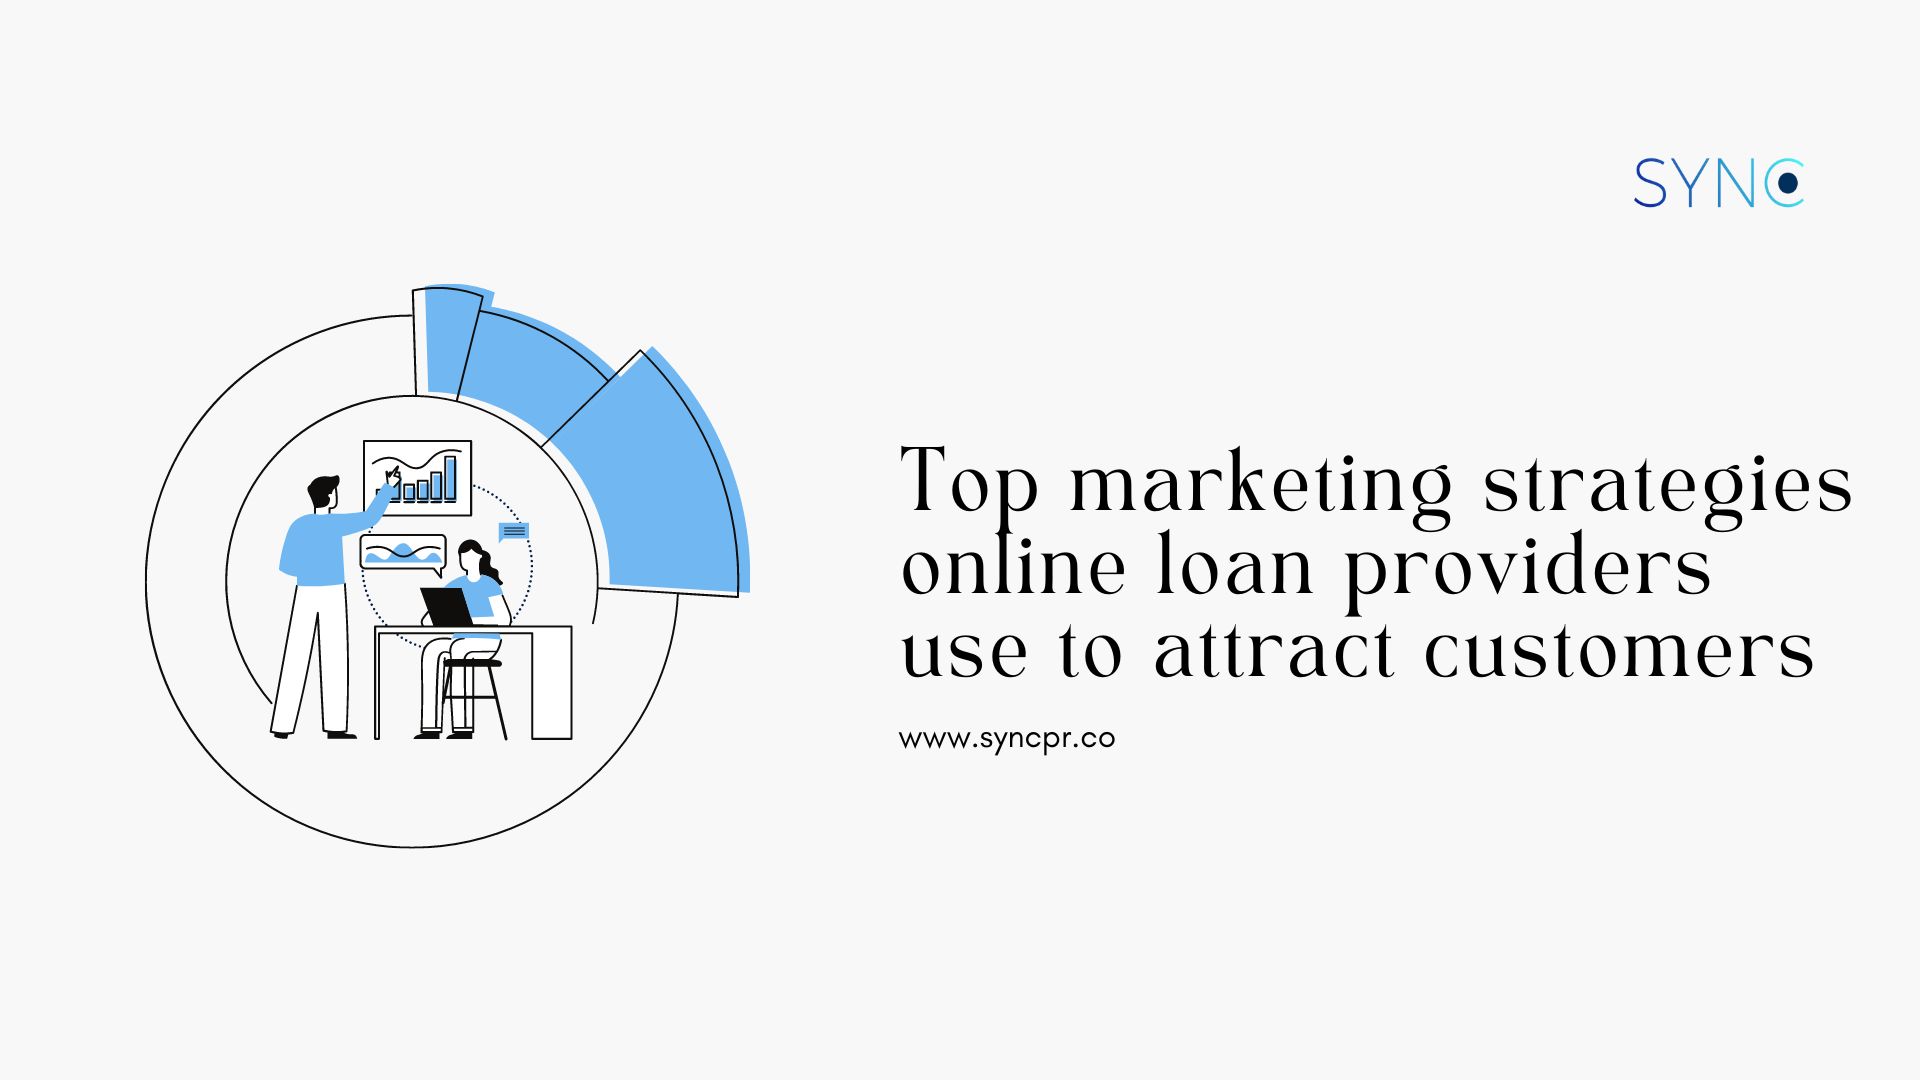 Top marketing strategies online loan providers use to attract customers